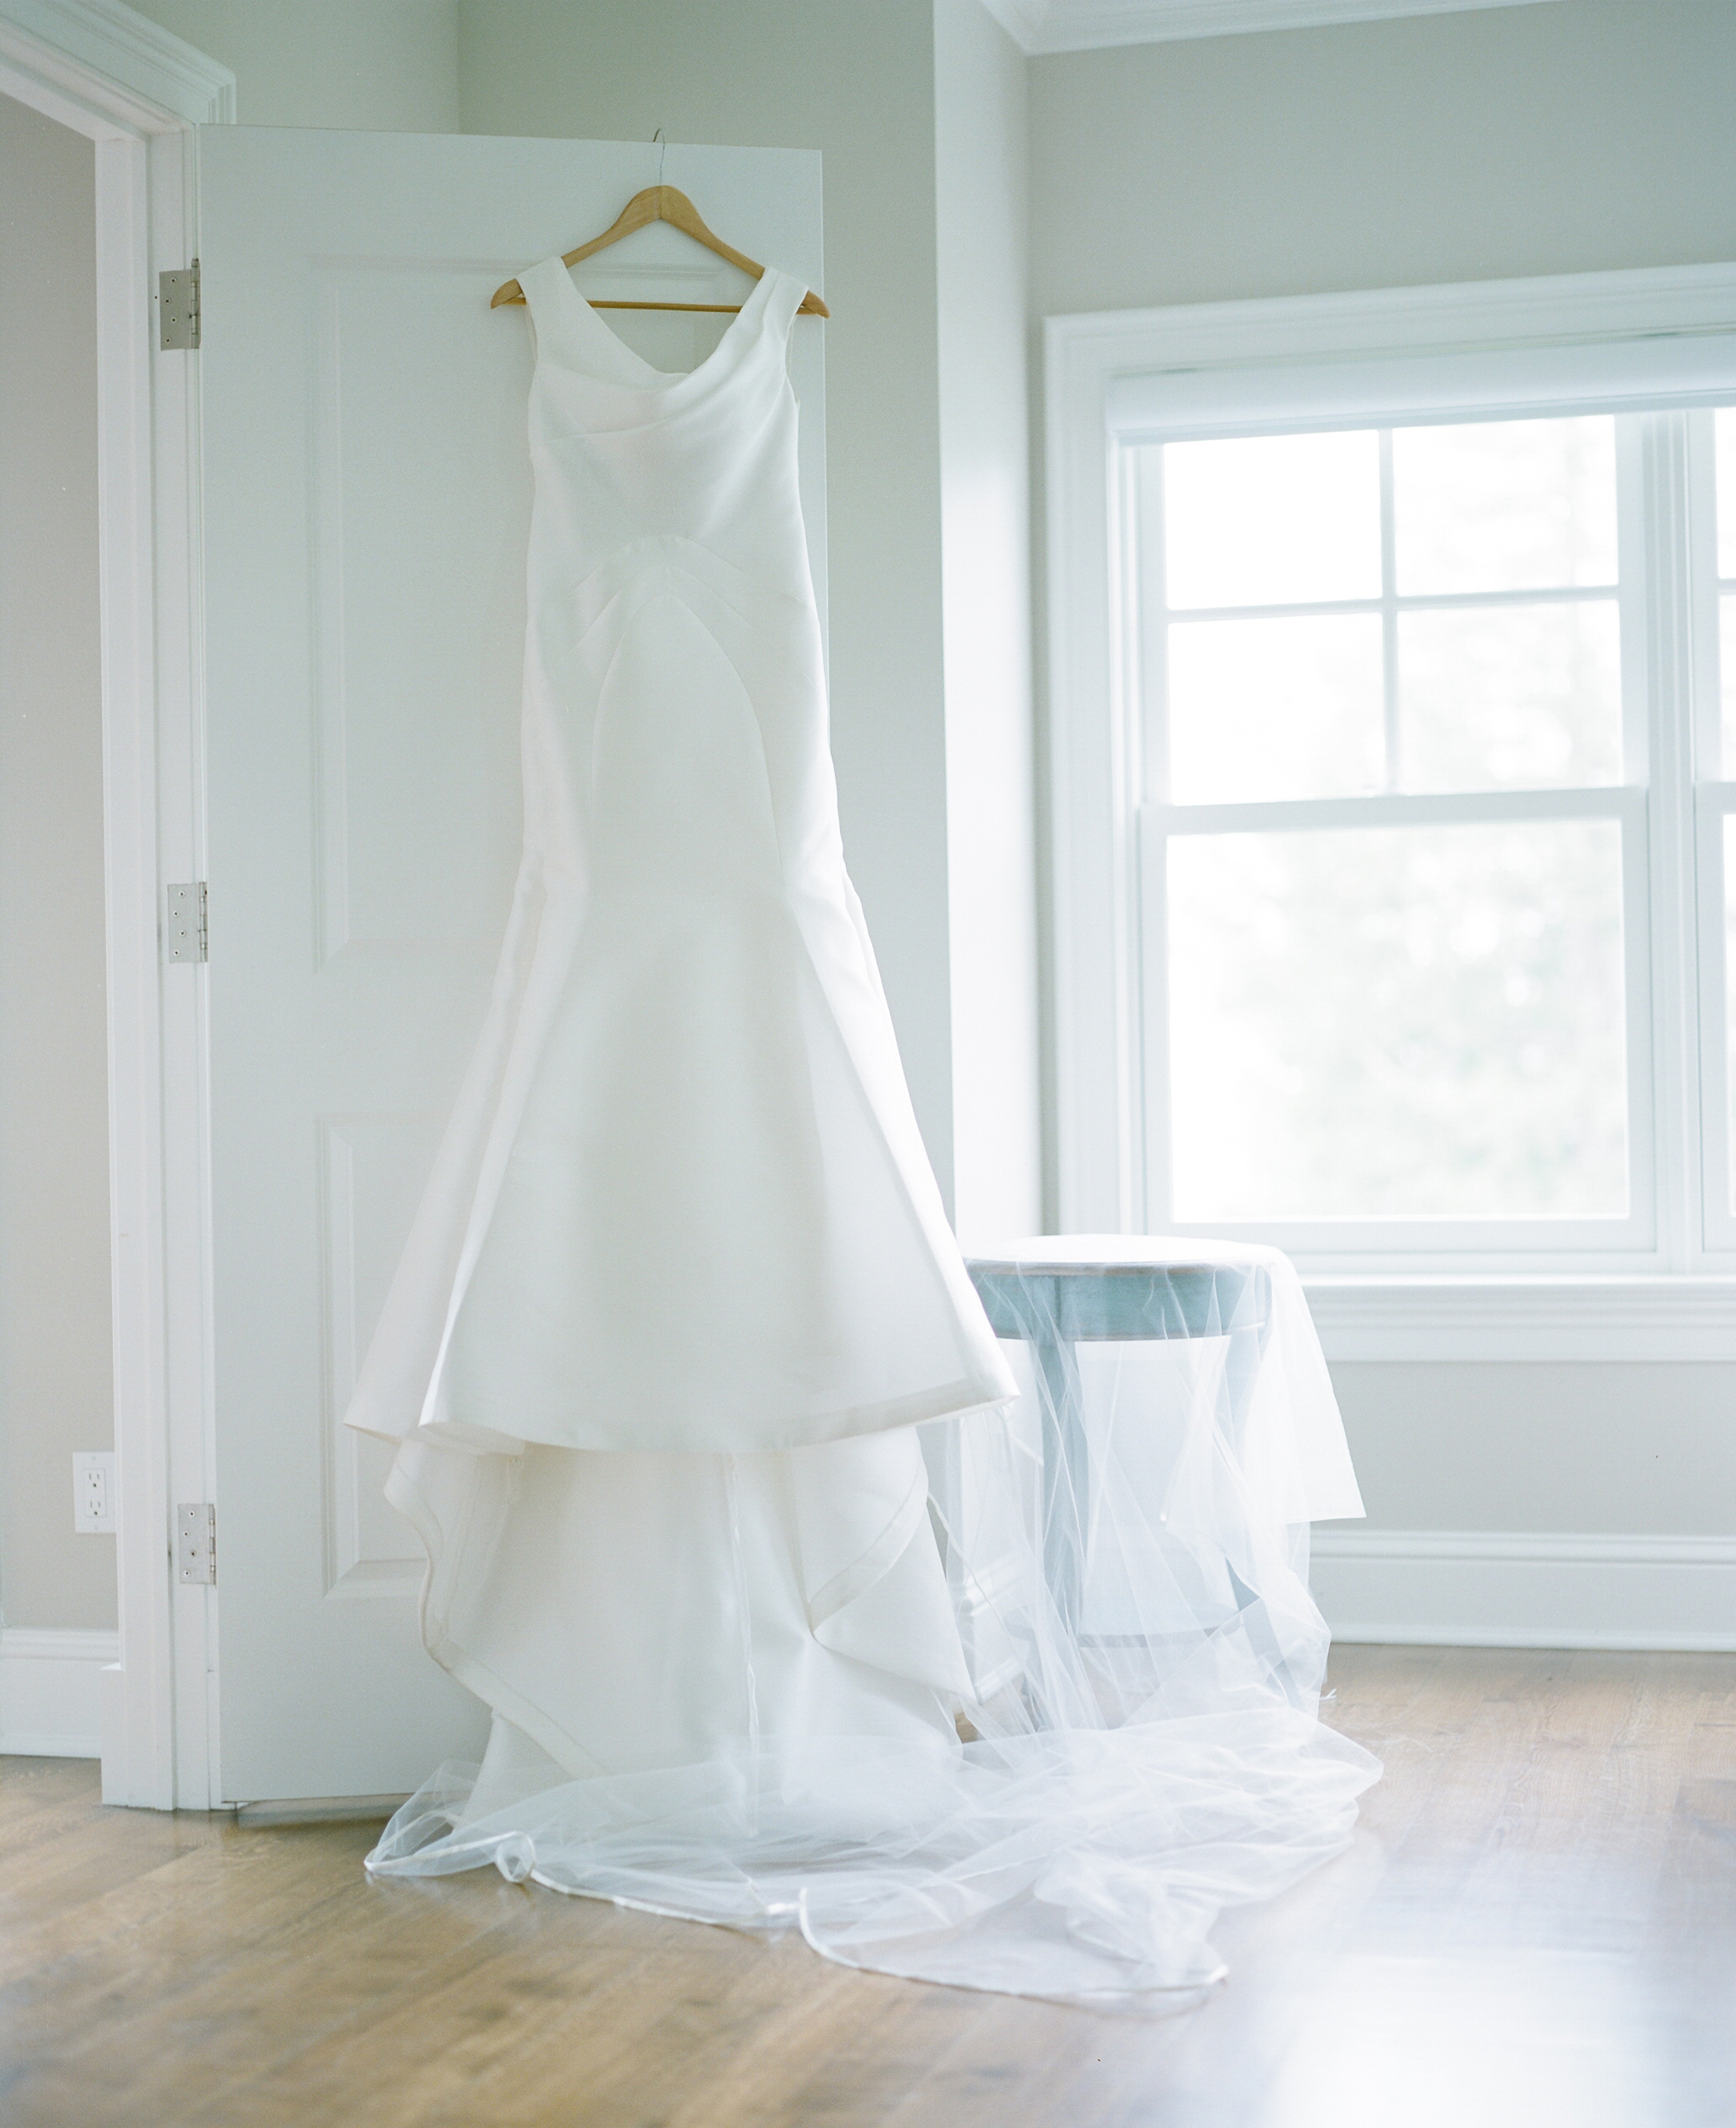 Lela Rose bridal gown from Gigi of Mequon